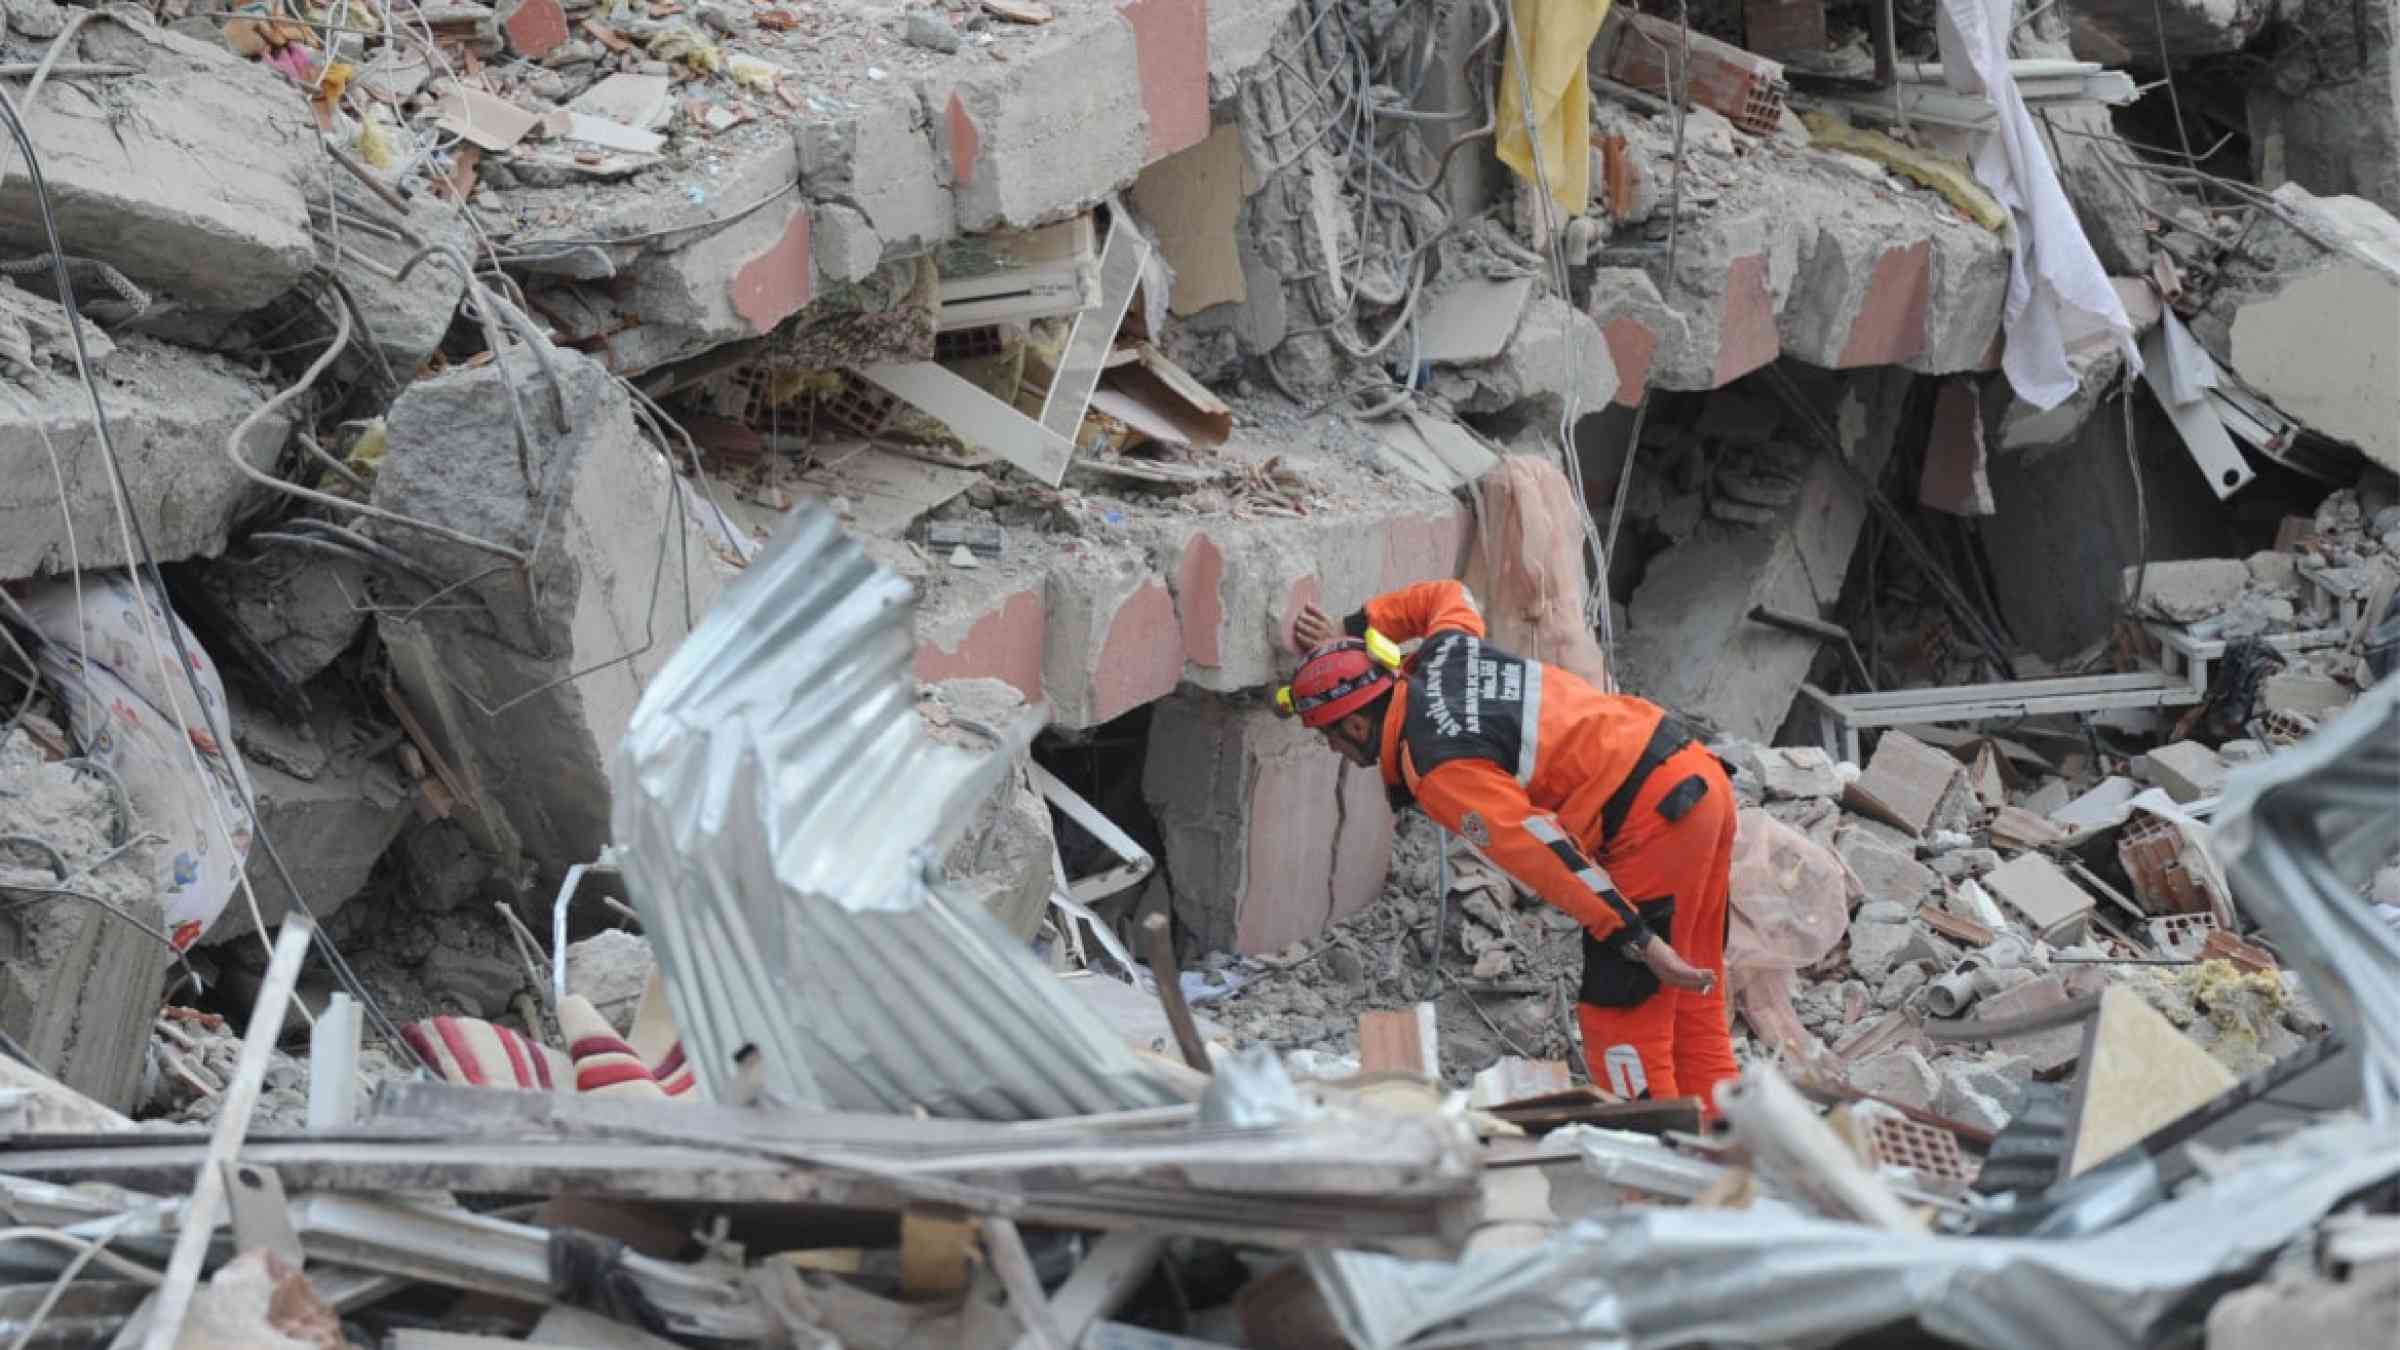 The 2011 Van earthquakes occurred in eastern Turkey near the city of Van.